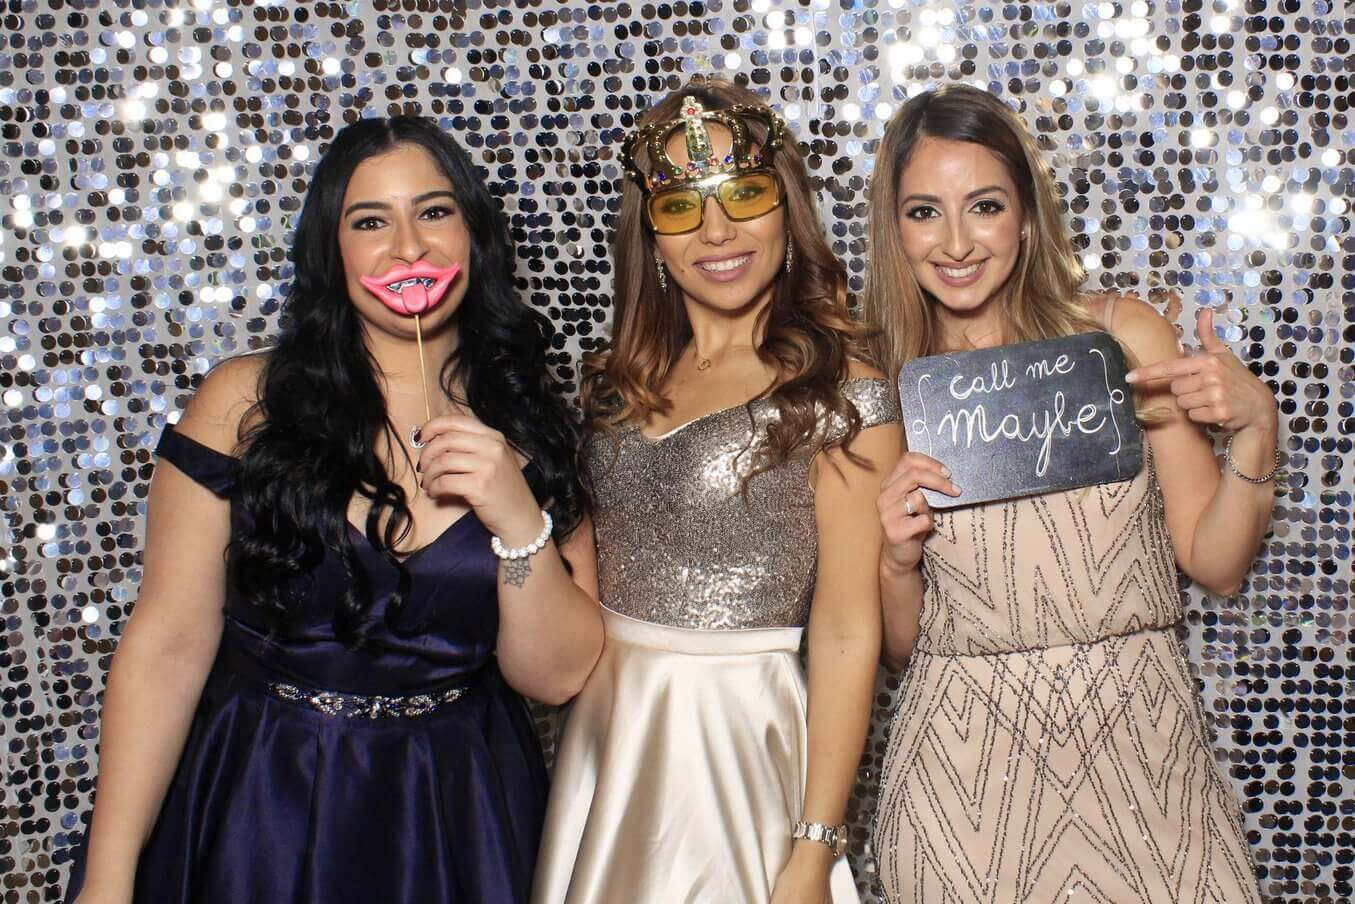 Photo booth rental in Toronto for a wedding. Posing in front of a silver coin backdrop offered by LOL Photo Booth. Tags: Event planning ideas, Photo booth prints, high resolution photos, Toronto photo booth rental services. GIFS, Boomerangs, Mosaic Walls, Slow motion, brand activation.